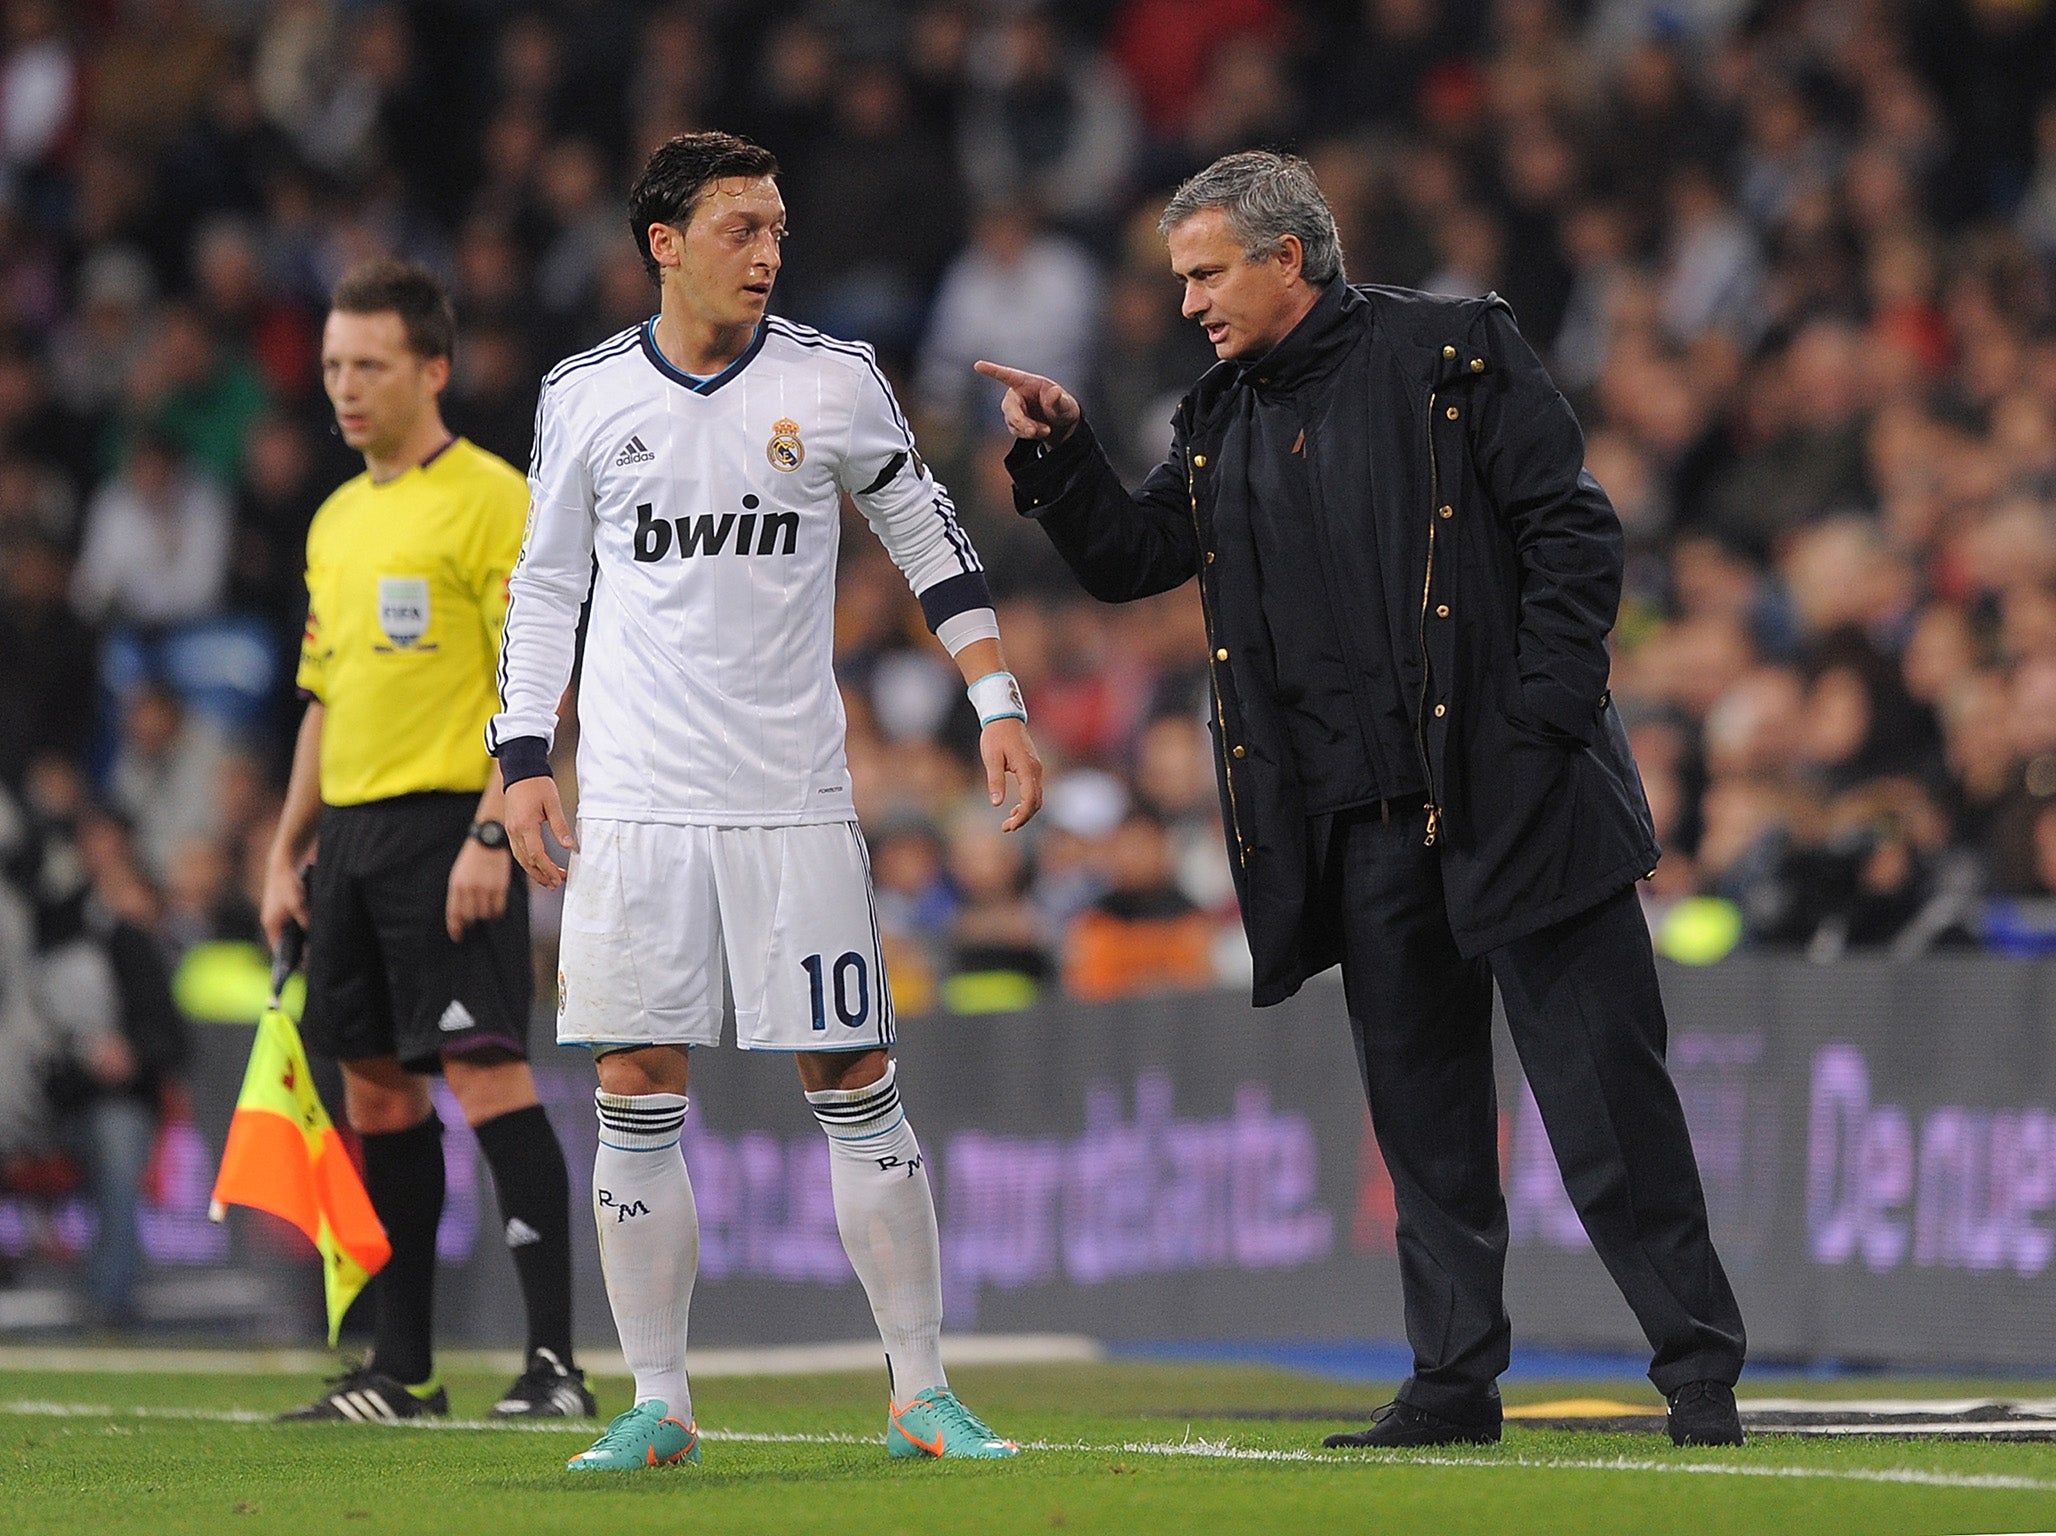 Ozil and Mourinho enjoyed a close relationship at Real Madrid